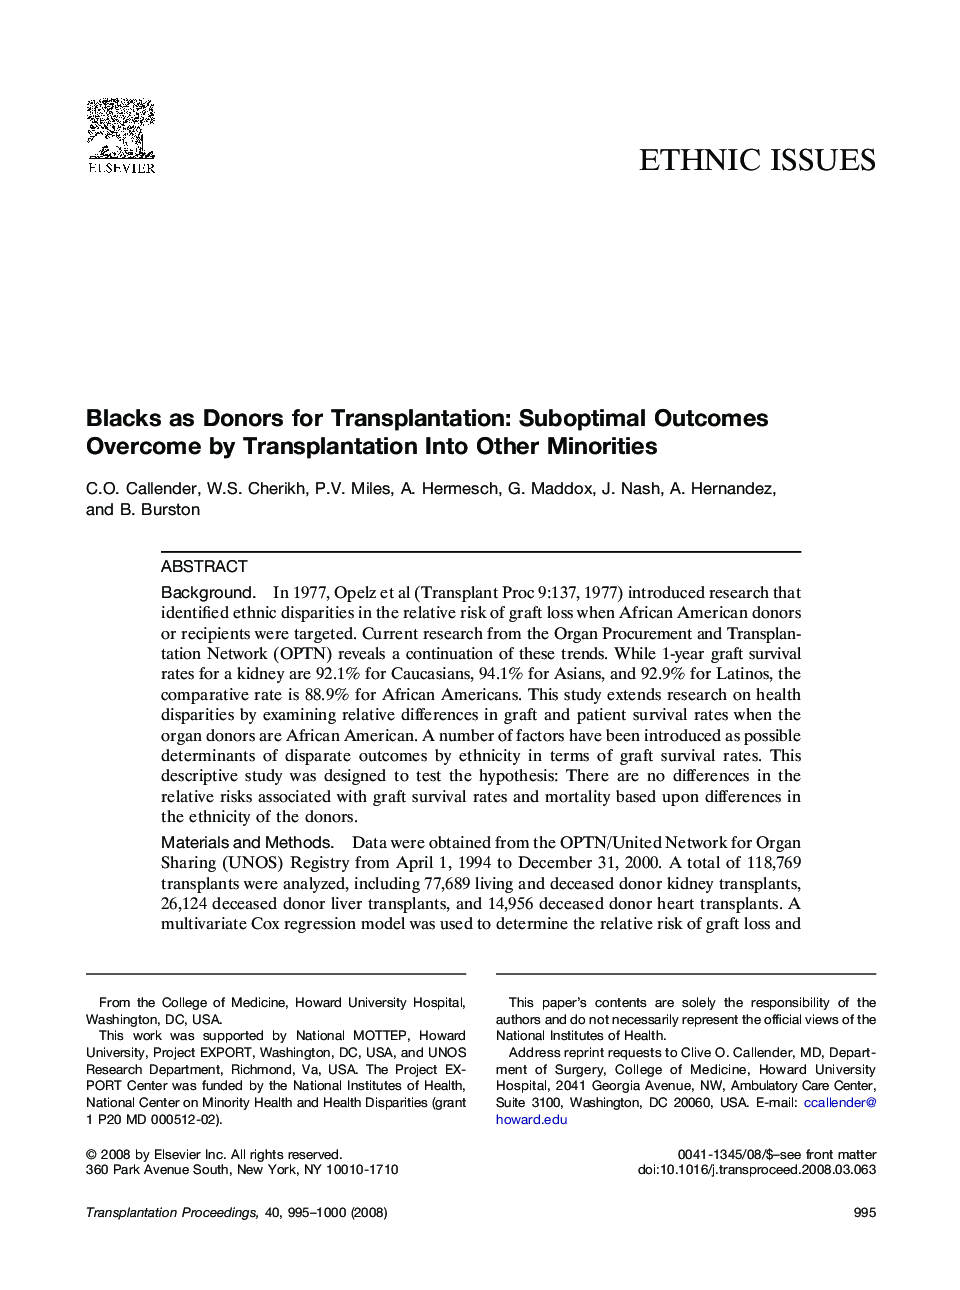 Blacks as Donors for Transplantation: Suboptimal Outcomes Overcome by Transplantation Into Other Minorities 